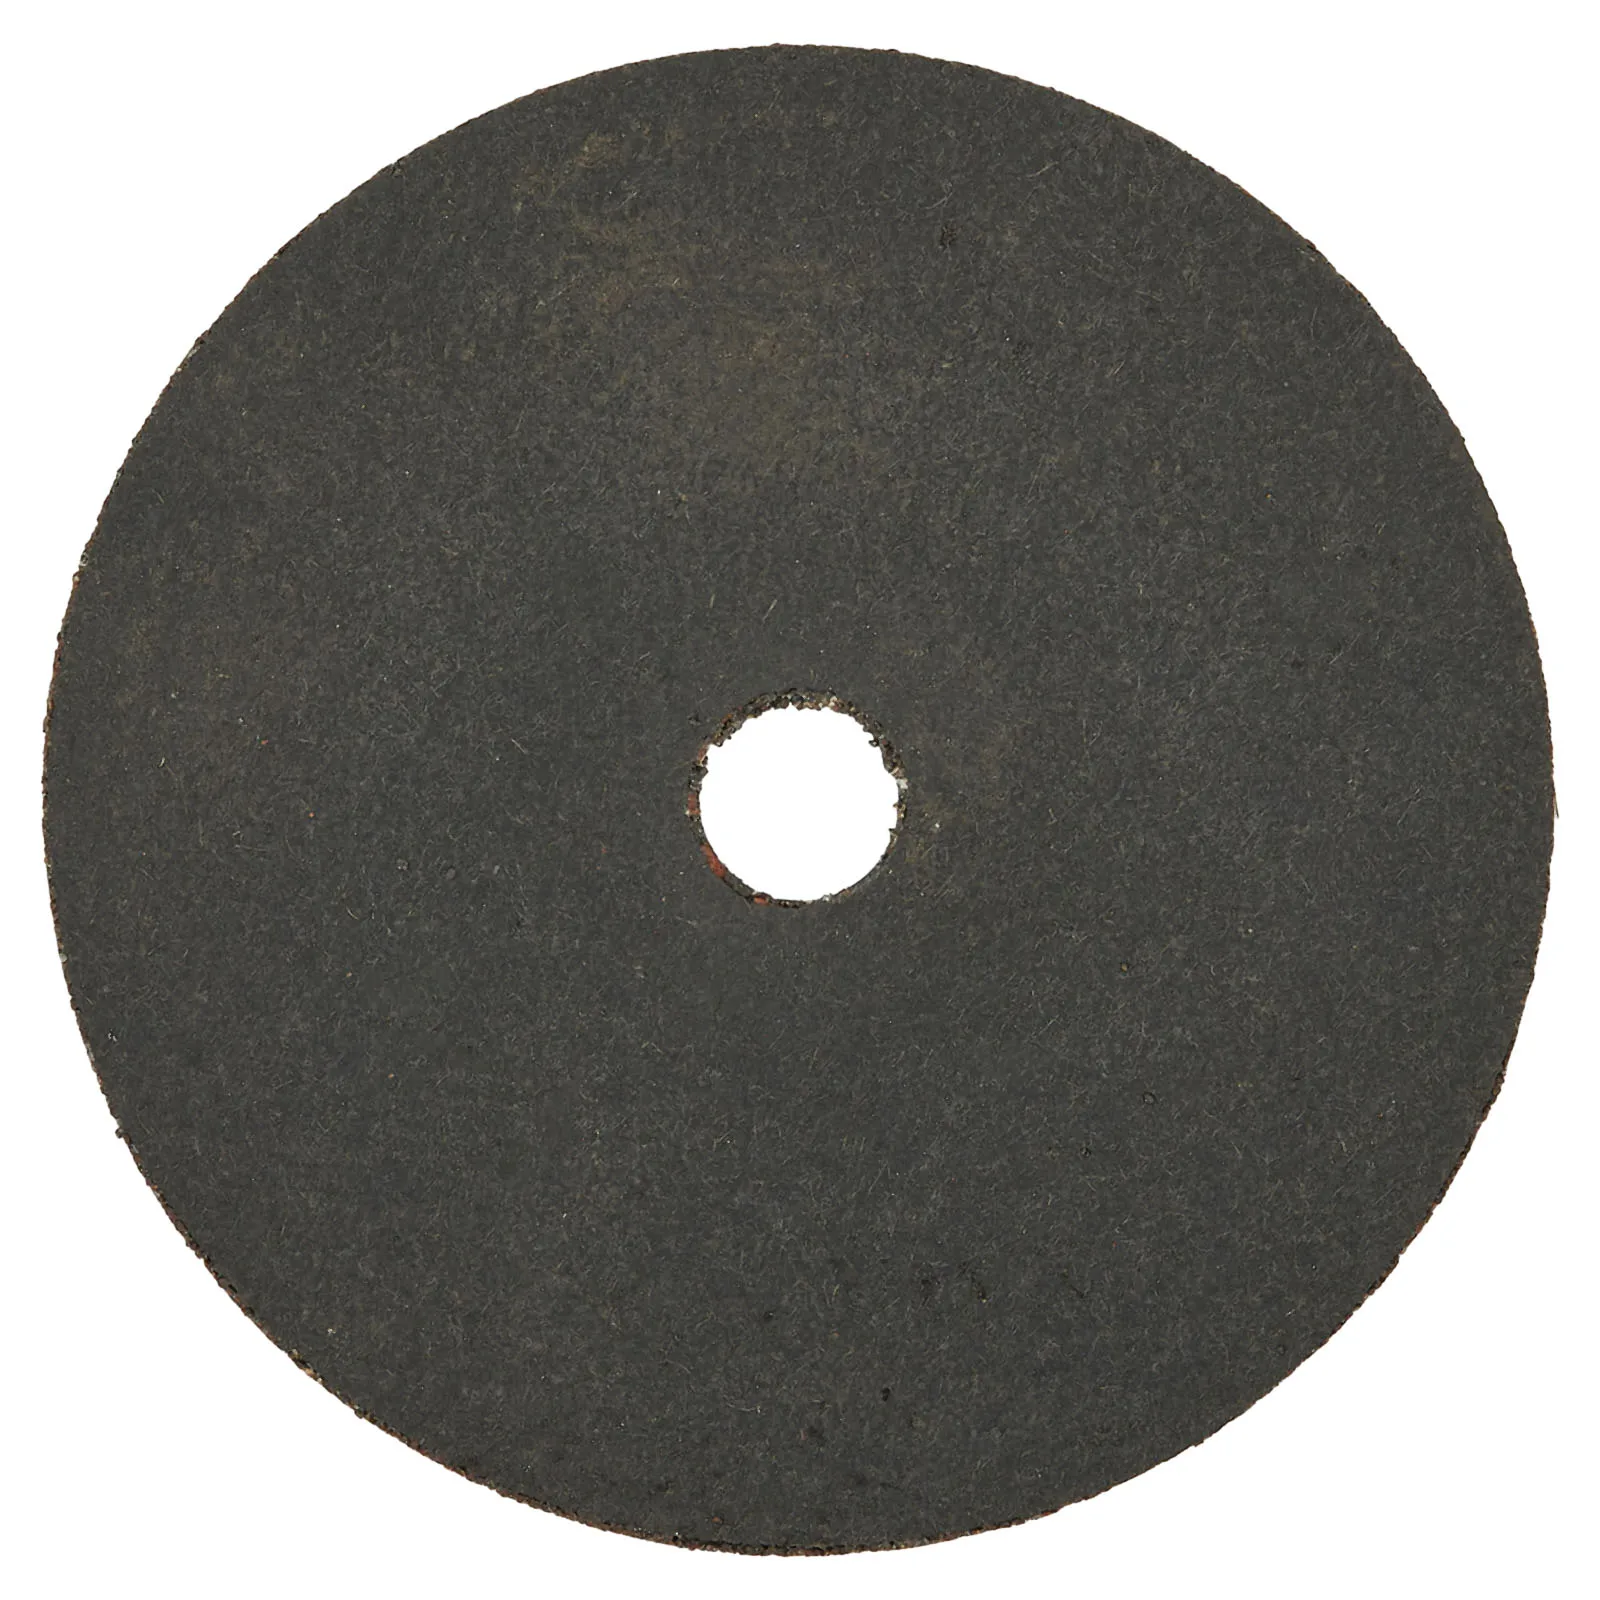 

1 Pc Circular Resin Grinding Wheel Saw Blade 76mm 3in Cutting Disc 10mm Bore Steel Cutting For Angle Grinder Accessories